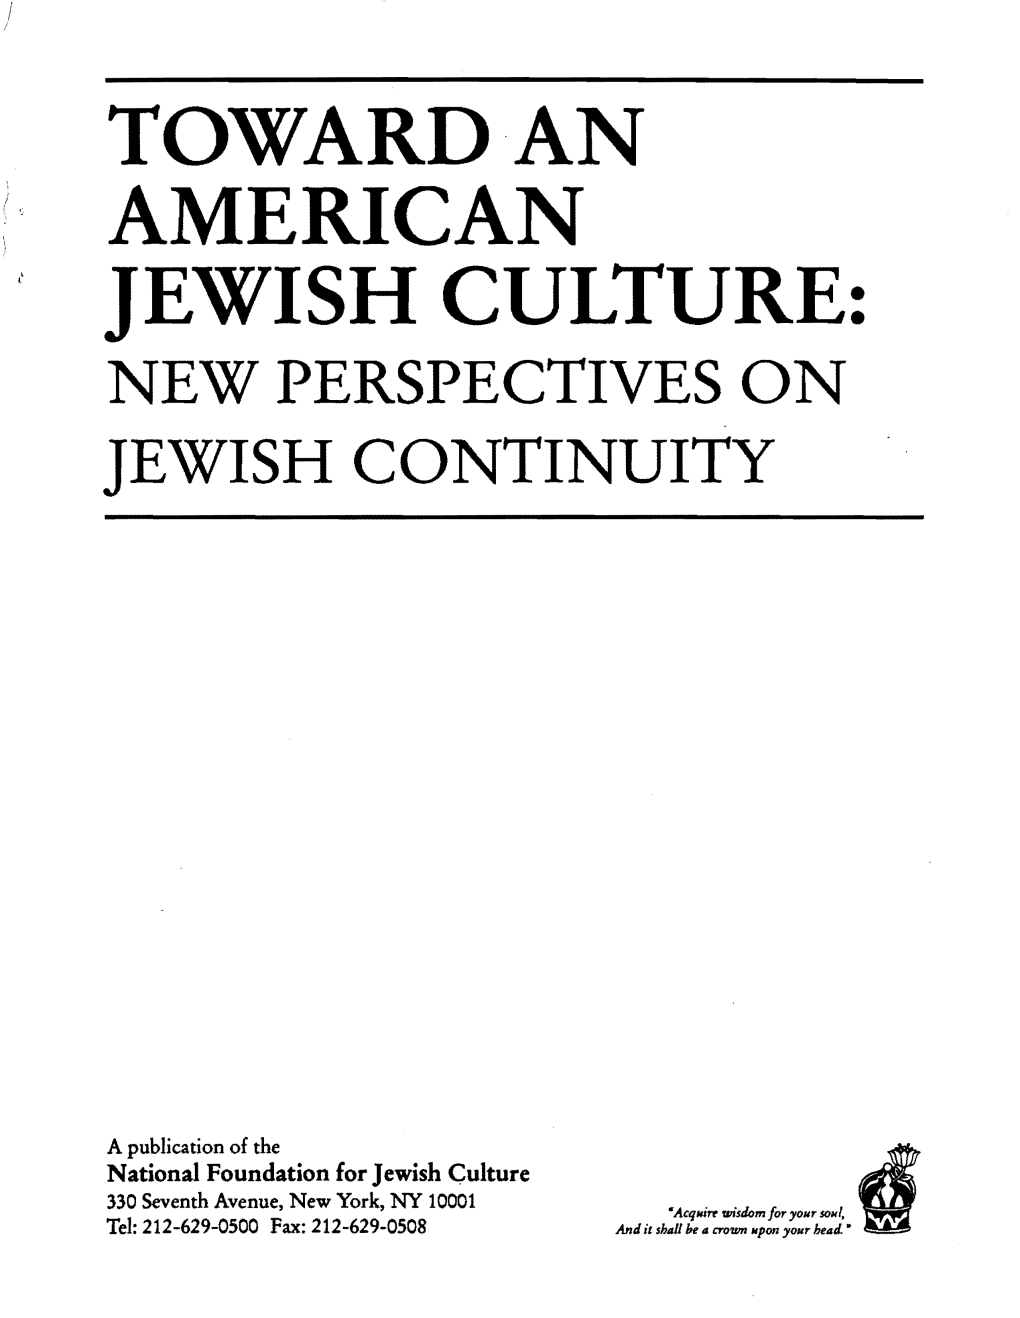 Jewish Culture: New Perspectives on Jewish Continuity